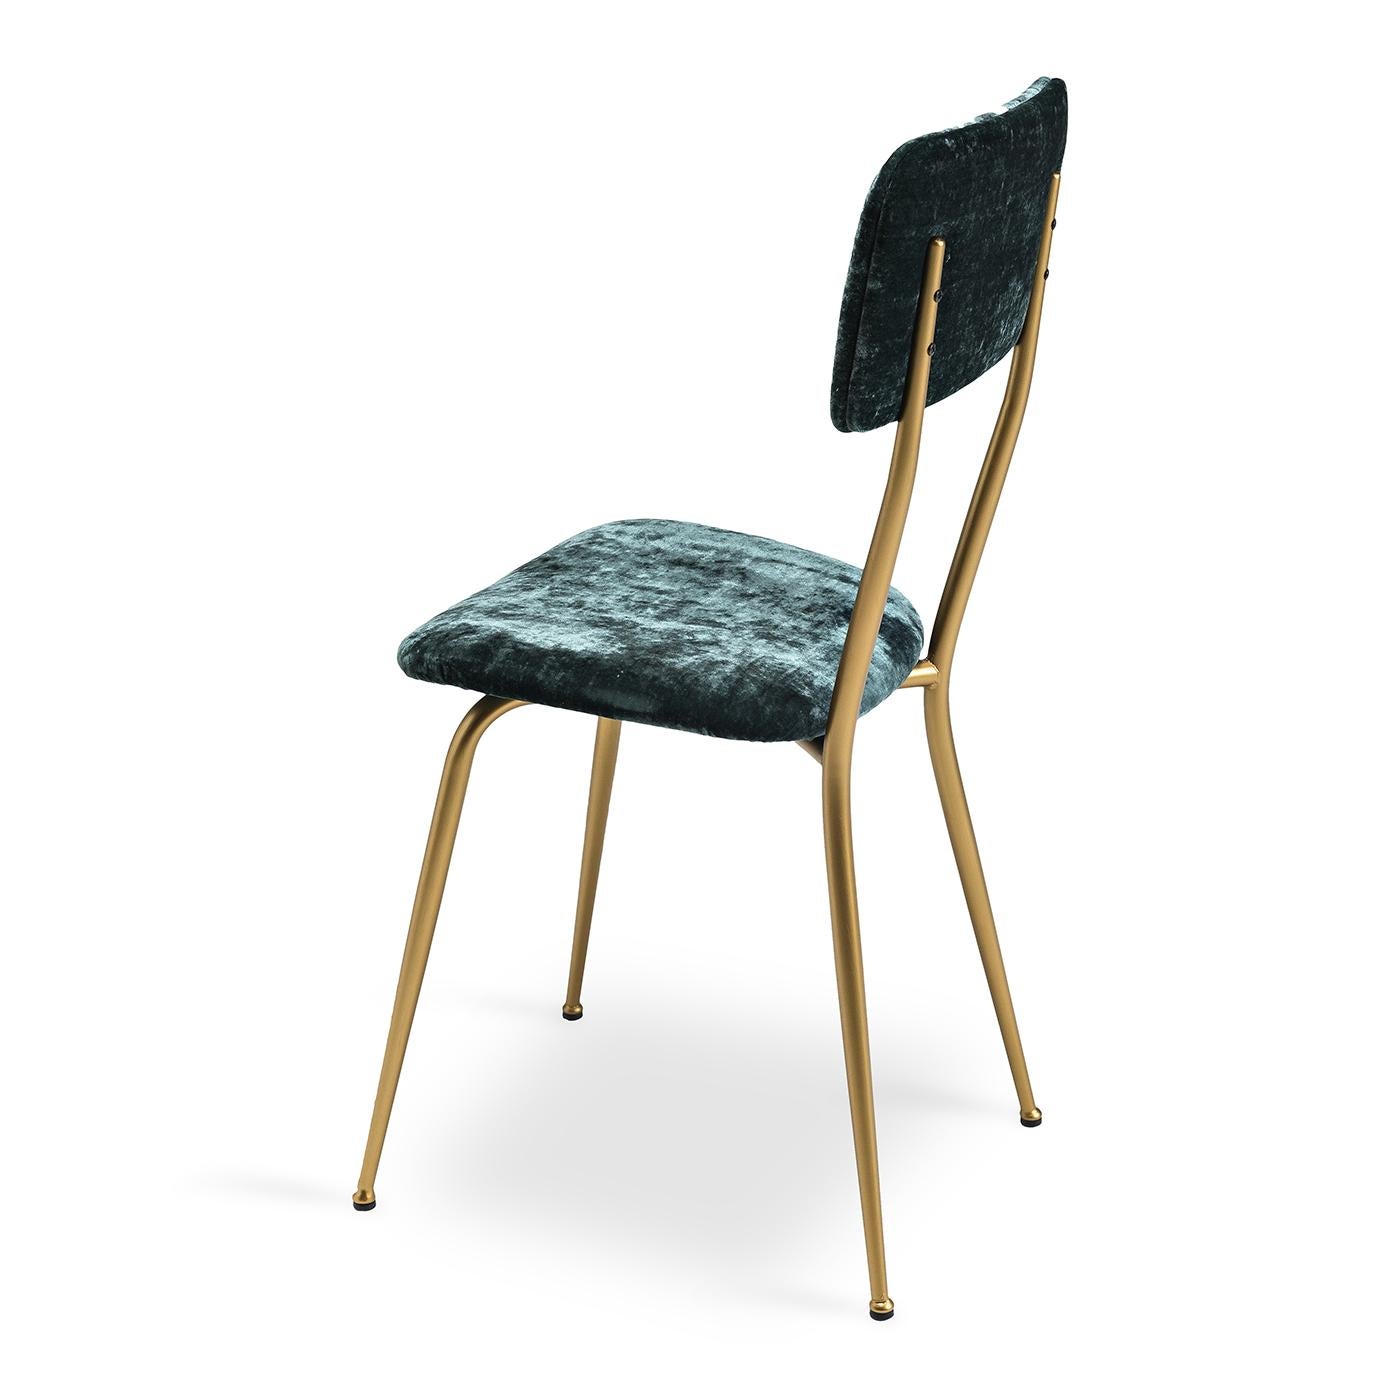 The Miss Ava 13 chair is distinguished by a sleek metal frame with a brushed brass finish. Effortlessly complementing its metallic tones is the luxurious ocean blue velvet fabric covering the chair's backrest and seat: a harmonious fusion of tones